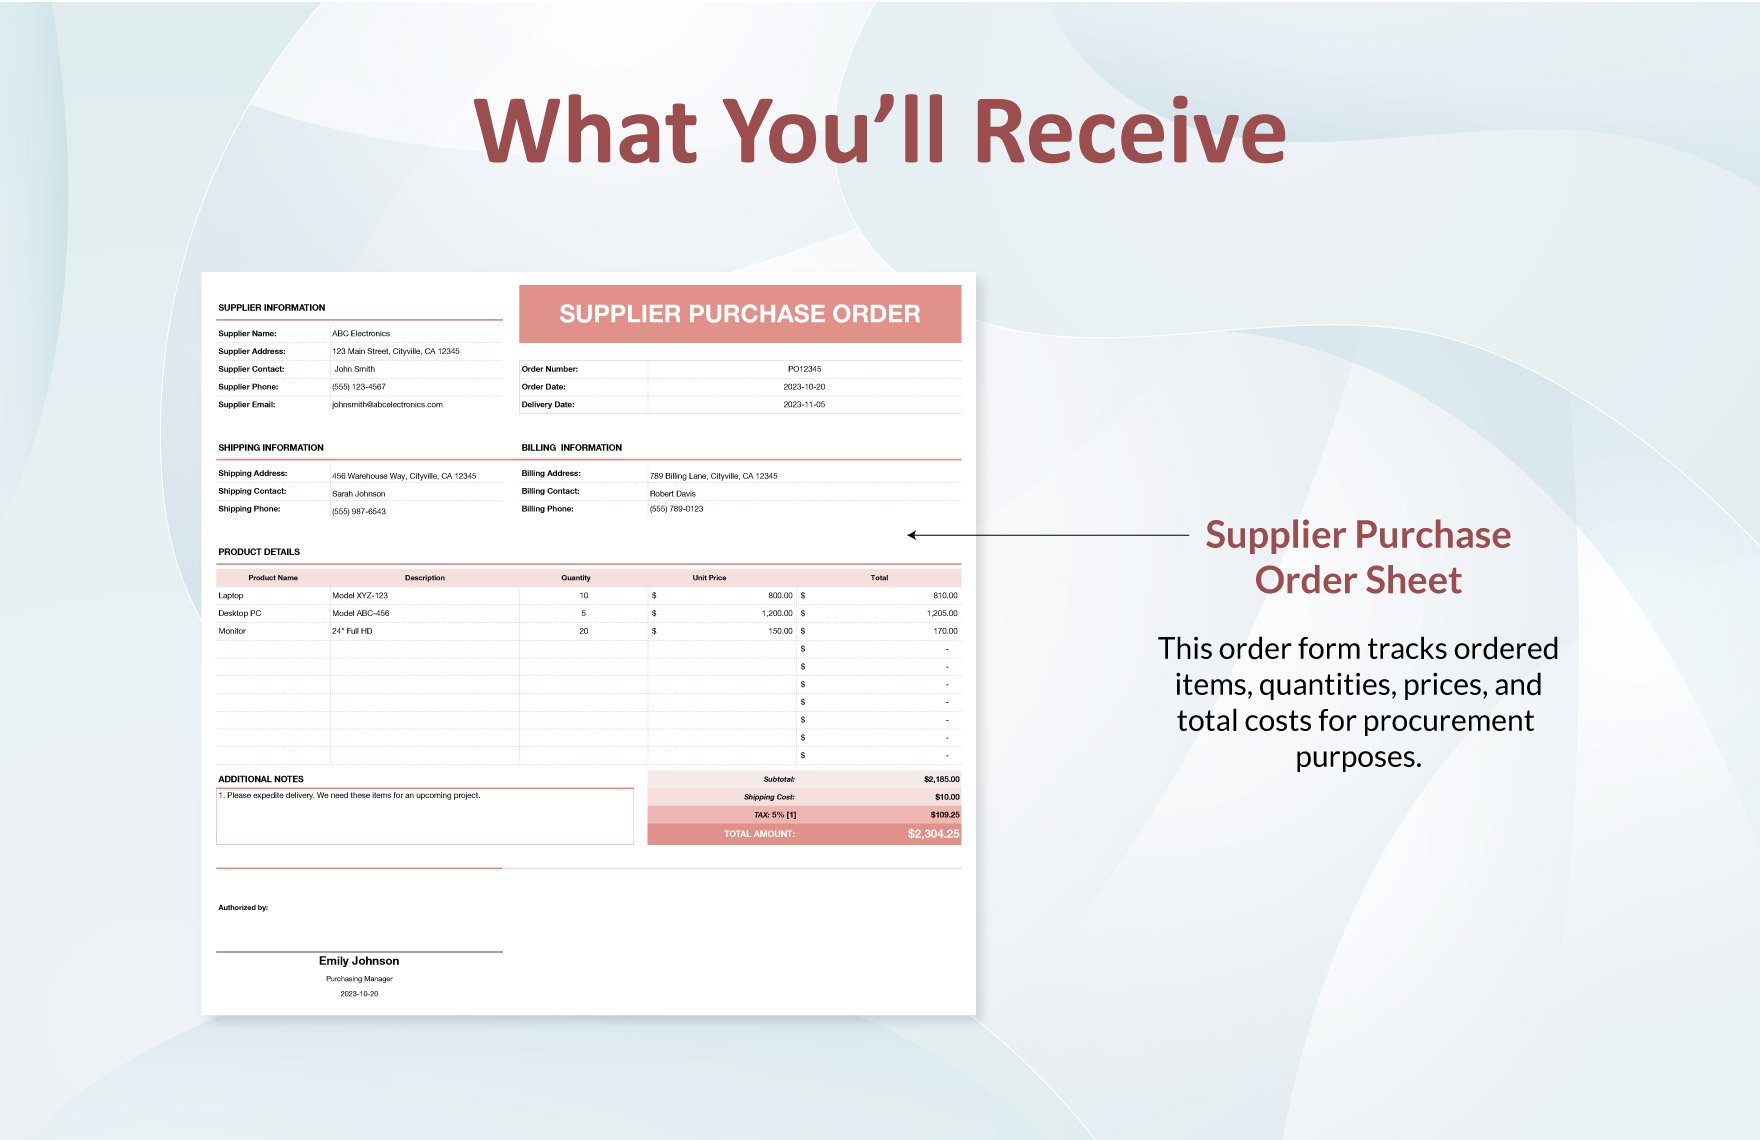 Supplier Purchase Order Template